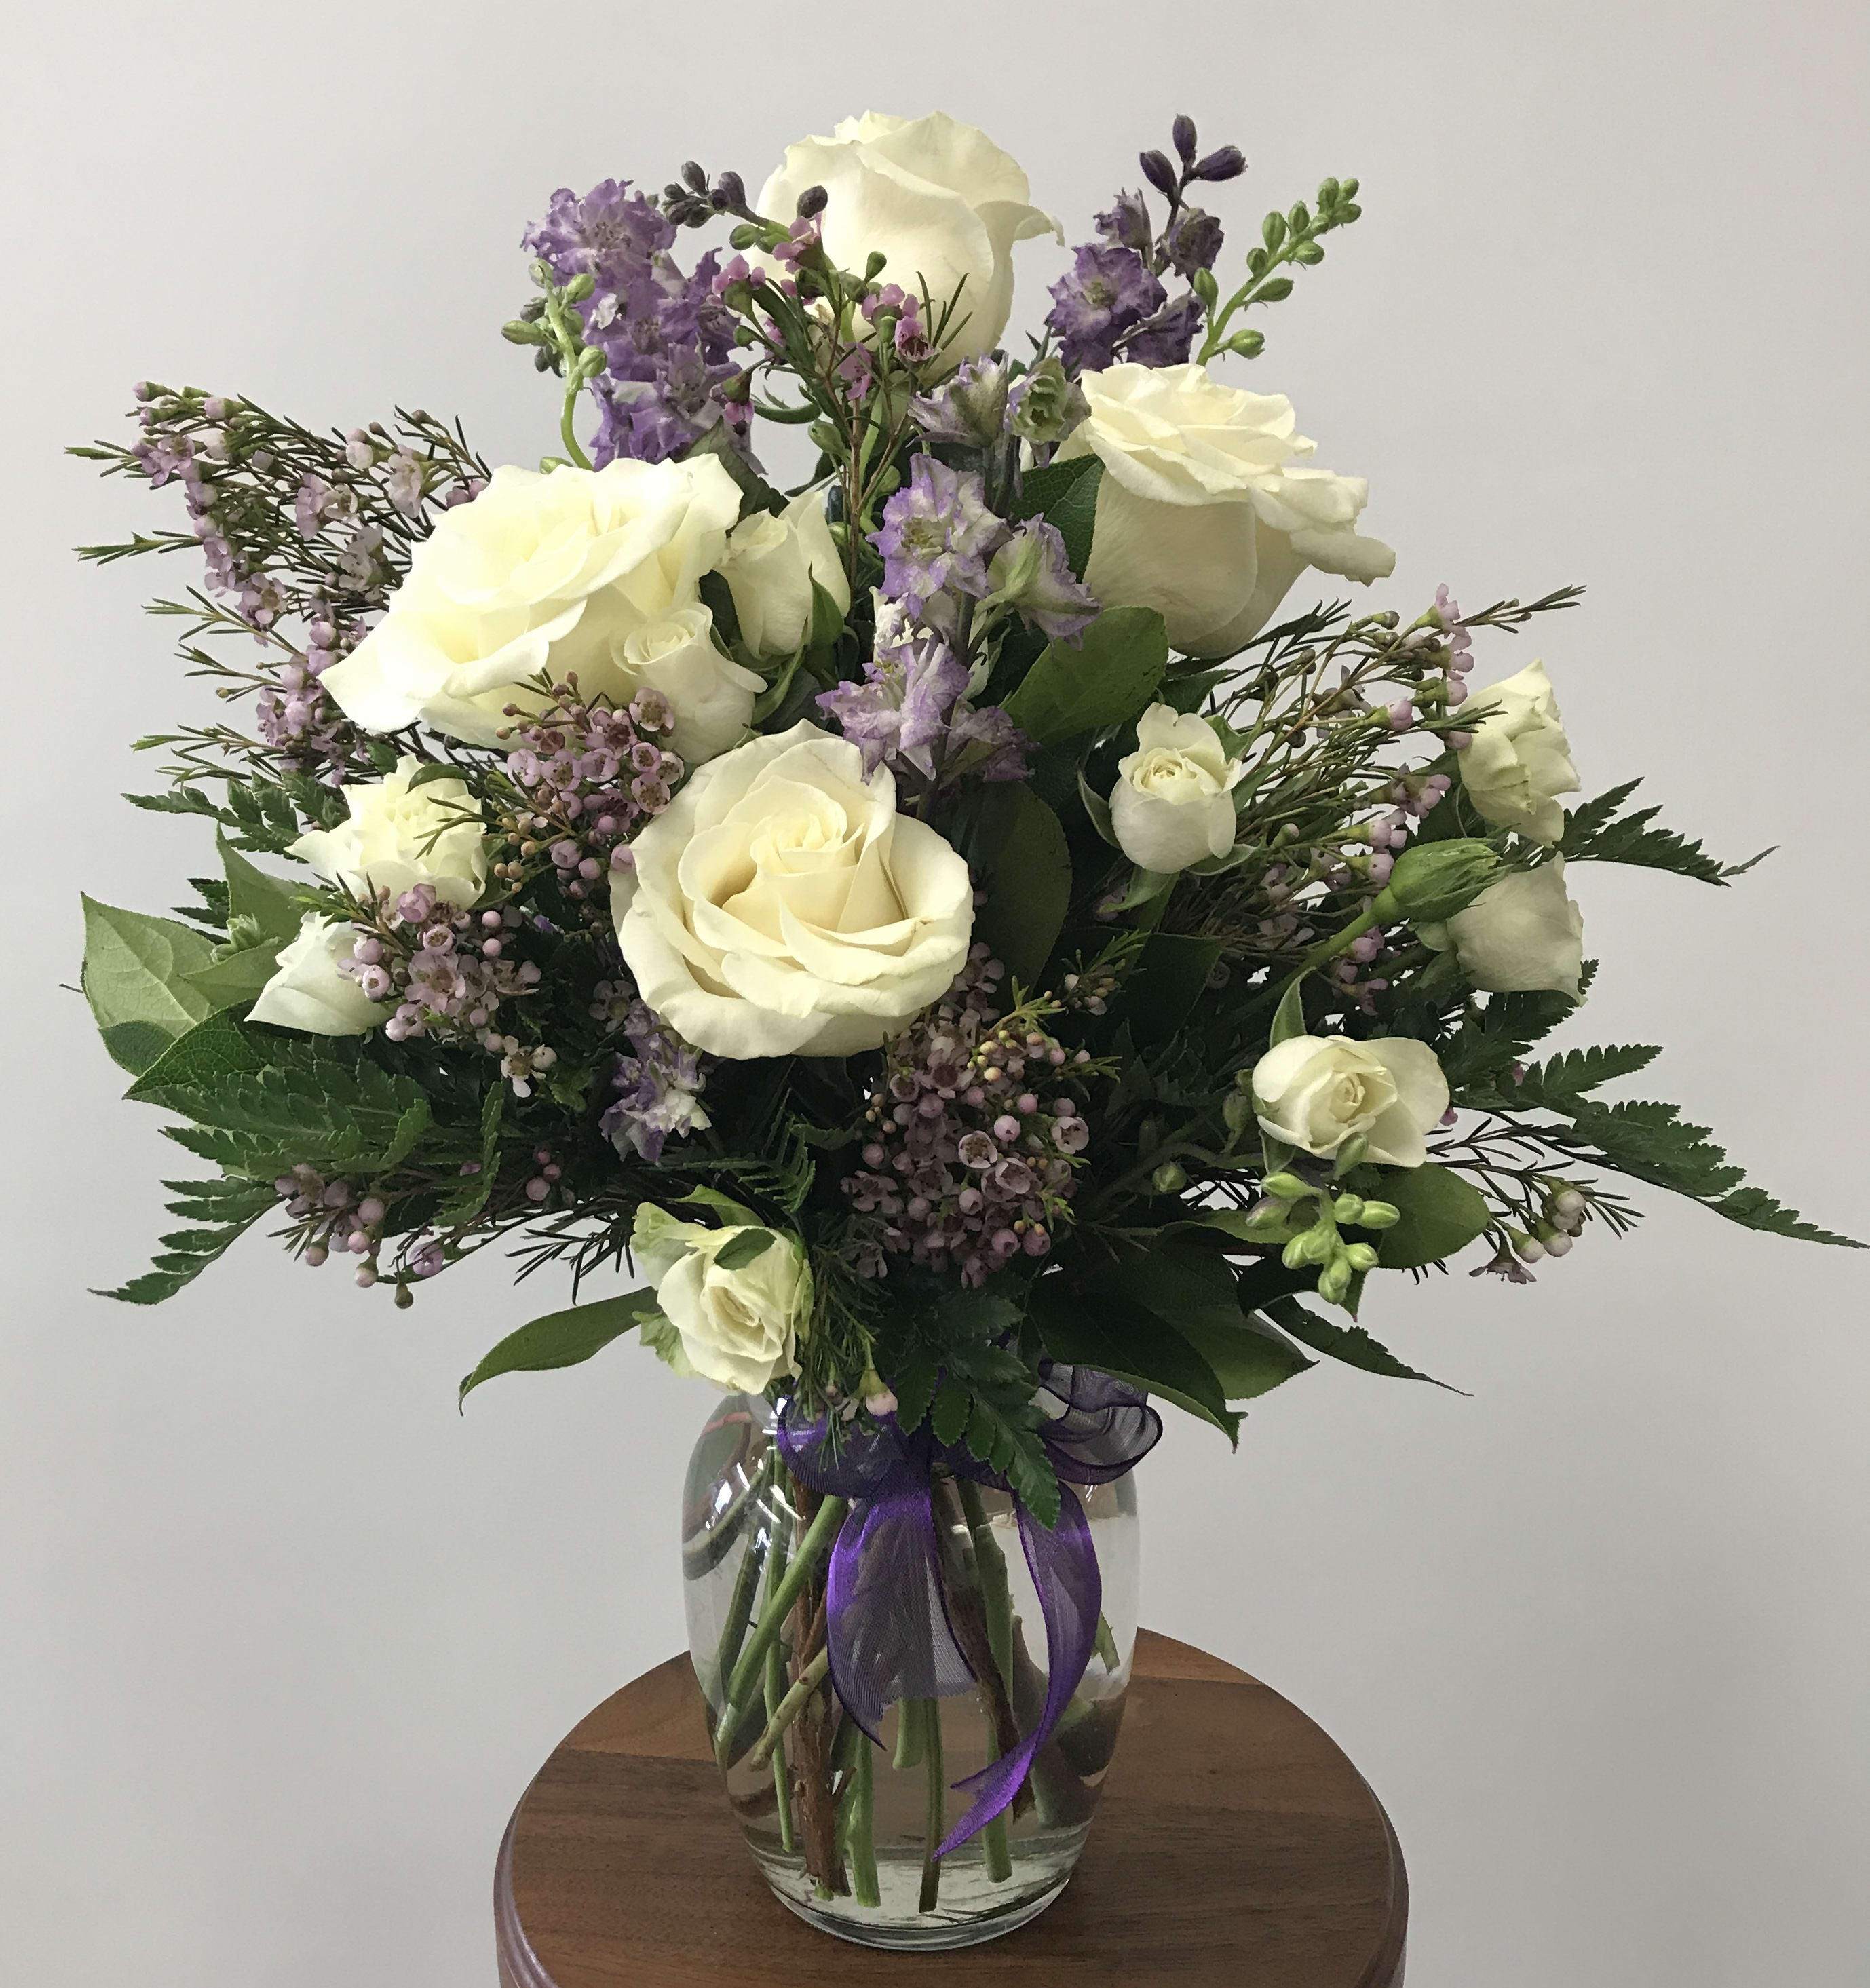 Enchanted Cottage - As enchanting arrangement of whites and lavenders with flowers such as white roses and purple larkspur mixed with delicate lavender accents for an elegant English garden look. The decorative bouquet is finished with a pretty satin ribbon.  Flowers may vary due to availability.  Orientation: one-sided